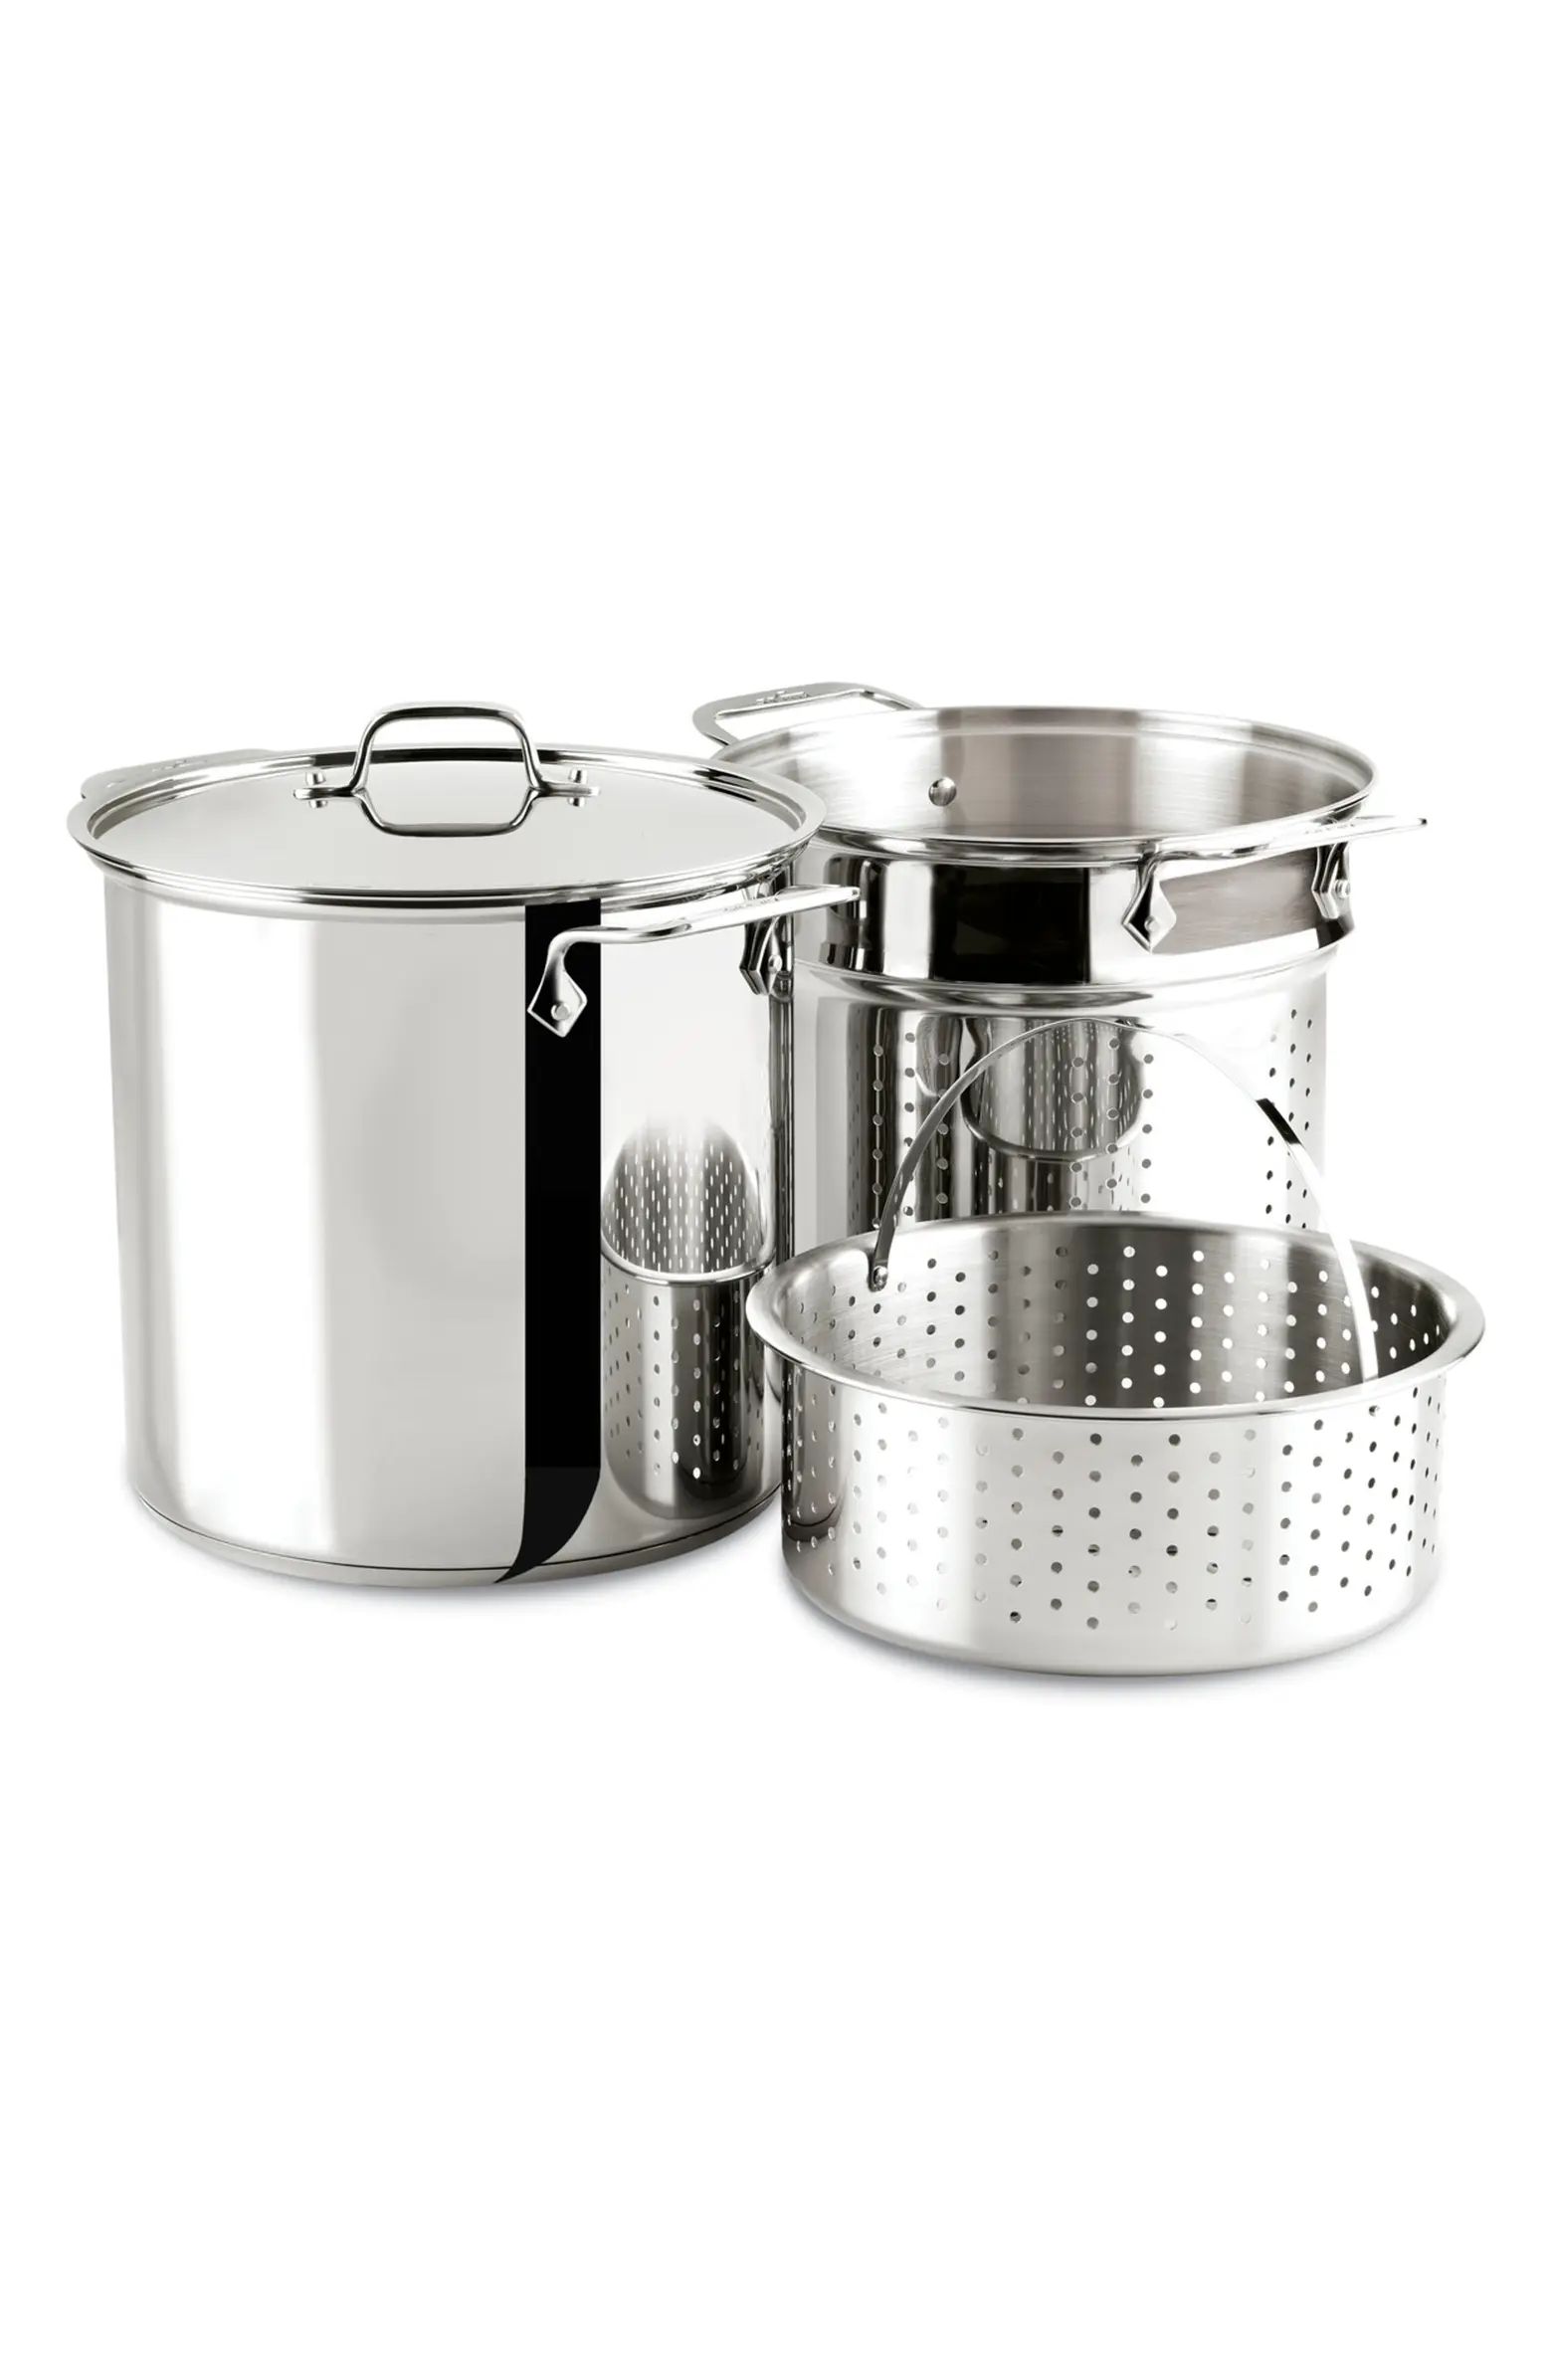 Stainless Steel 12-Quart Multi Pot with Lid | Nordstrom